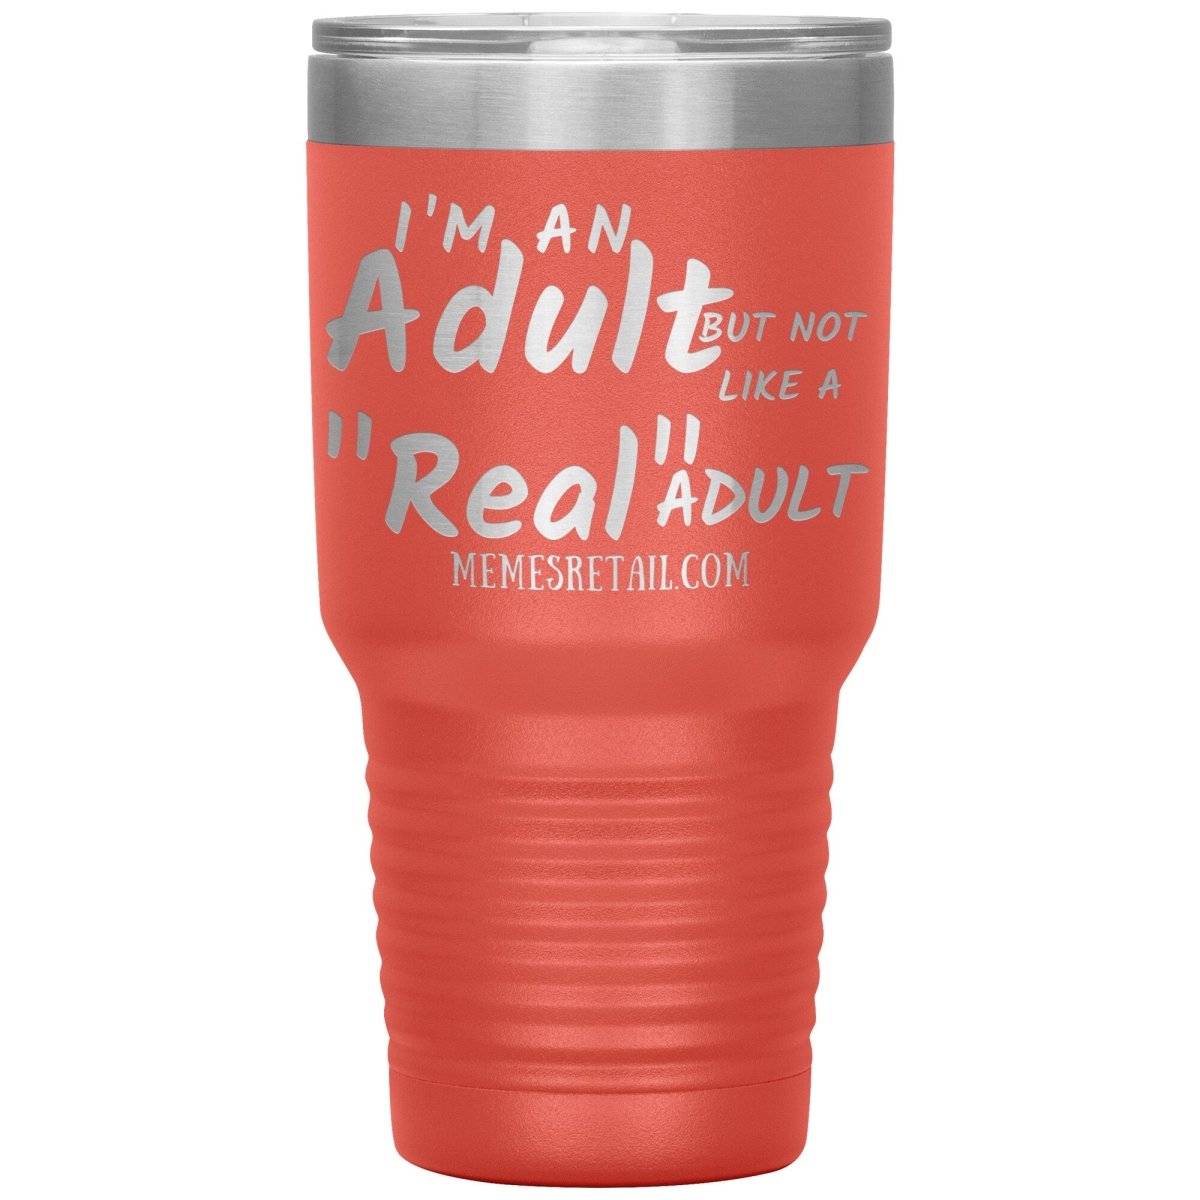 I'm an adult, but not like a "real" adult Tumblers, 30oz Insulated Tumbler / Coral - MemesRetail.com